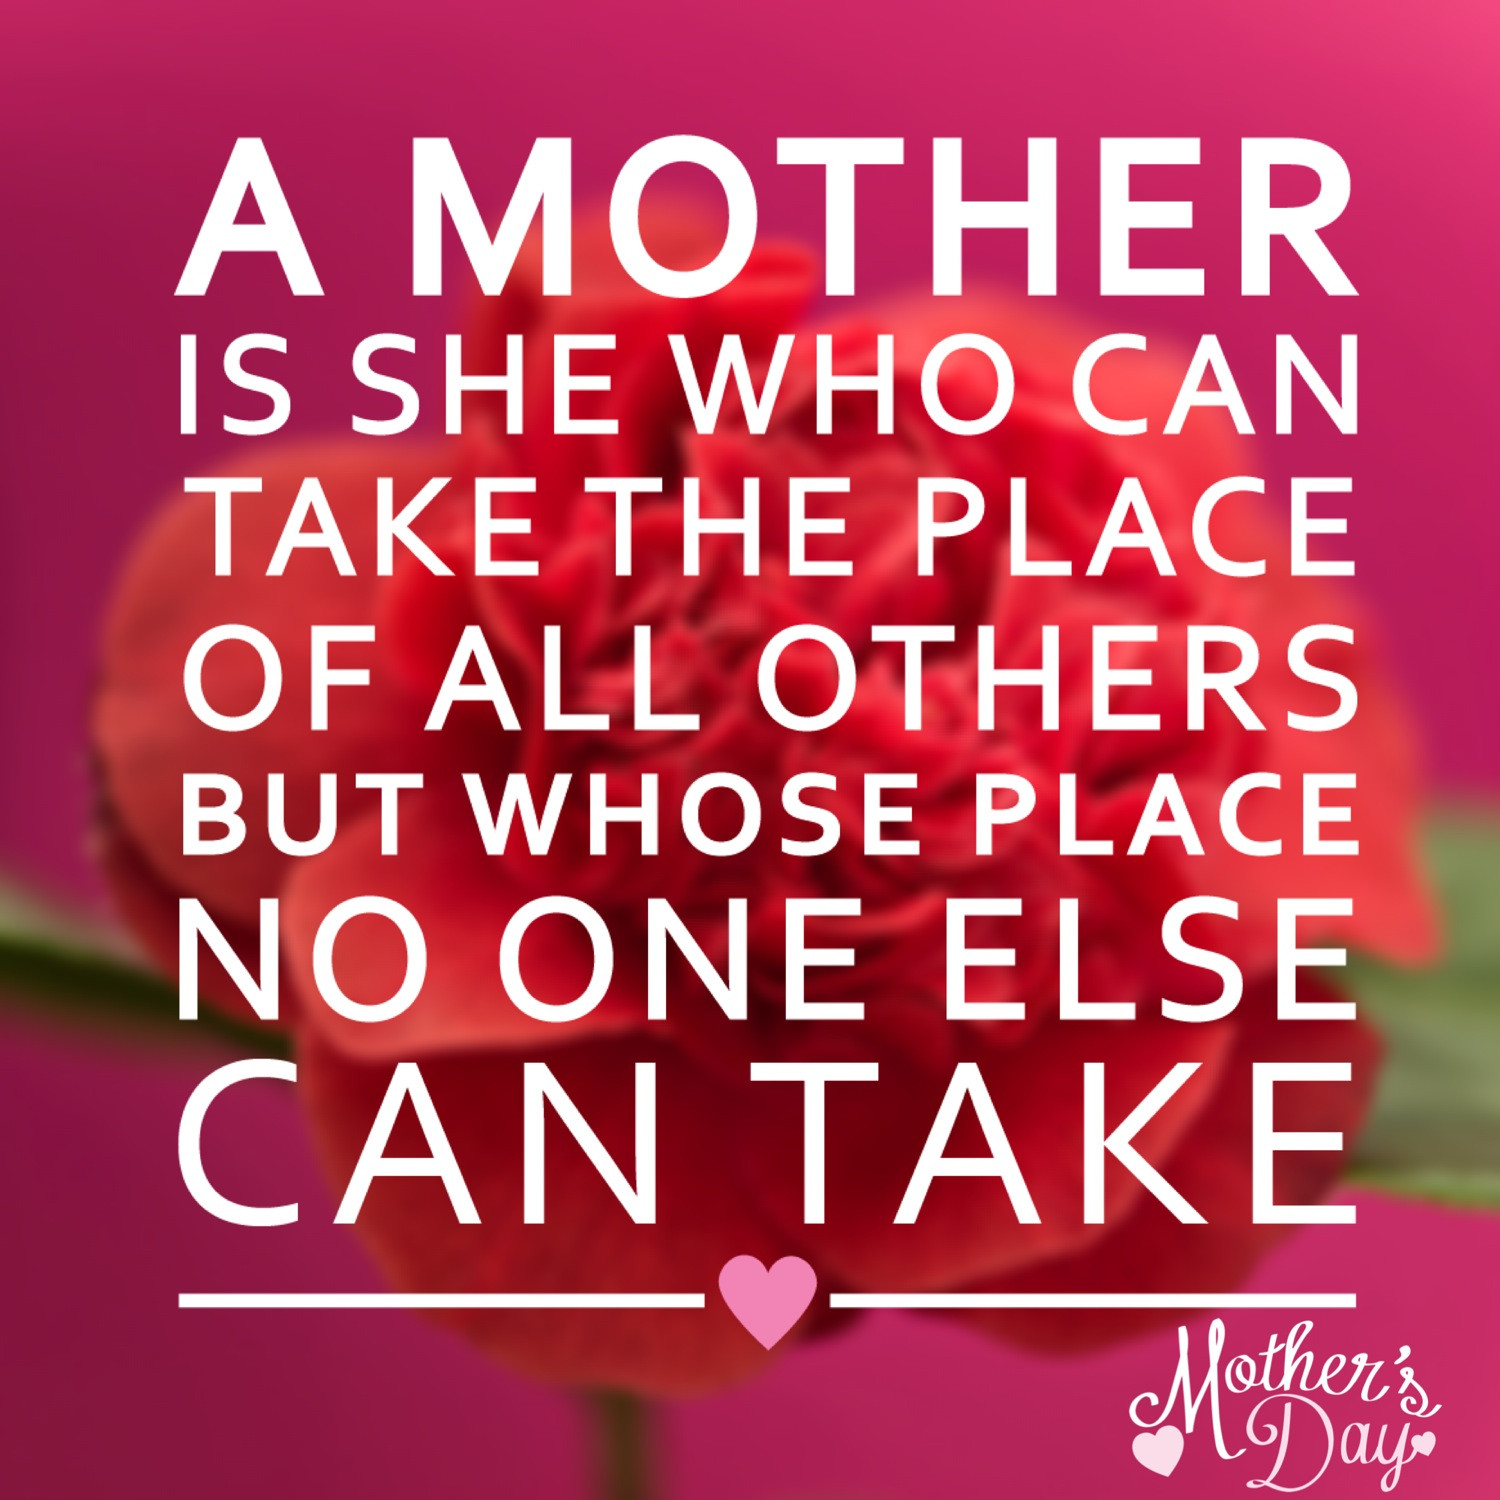 Quote Mother
 mothers day quotes Archives Tech Life Magazine